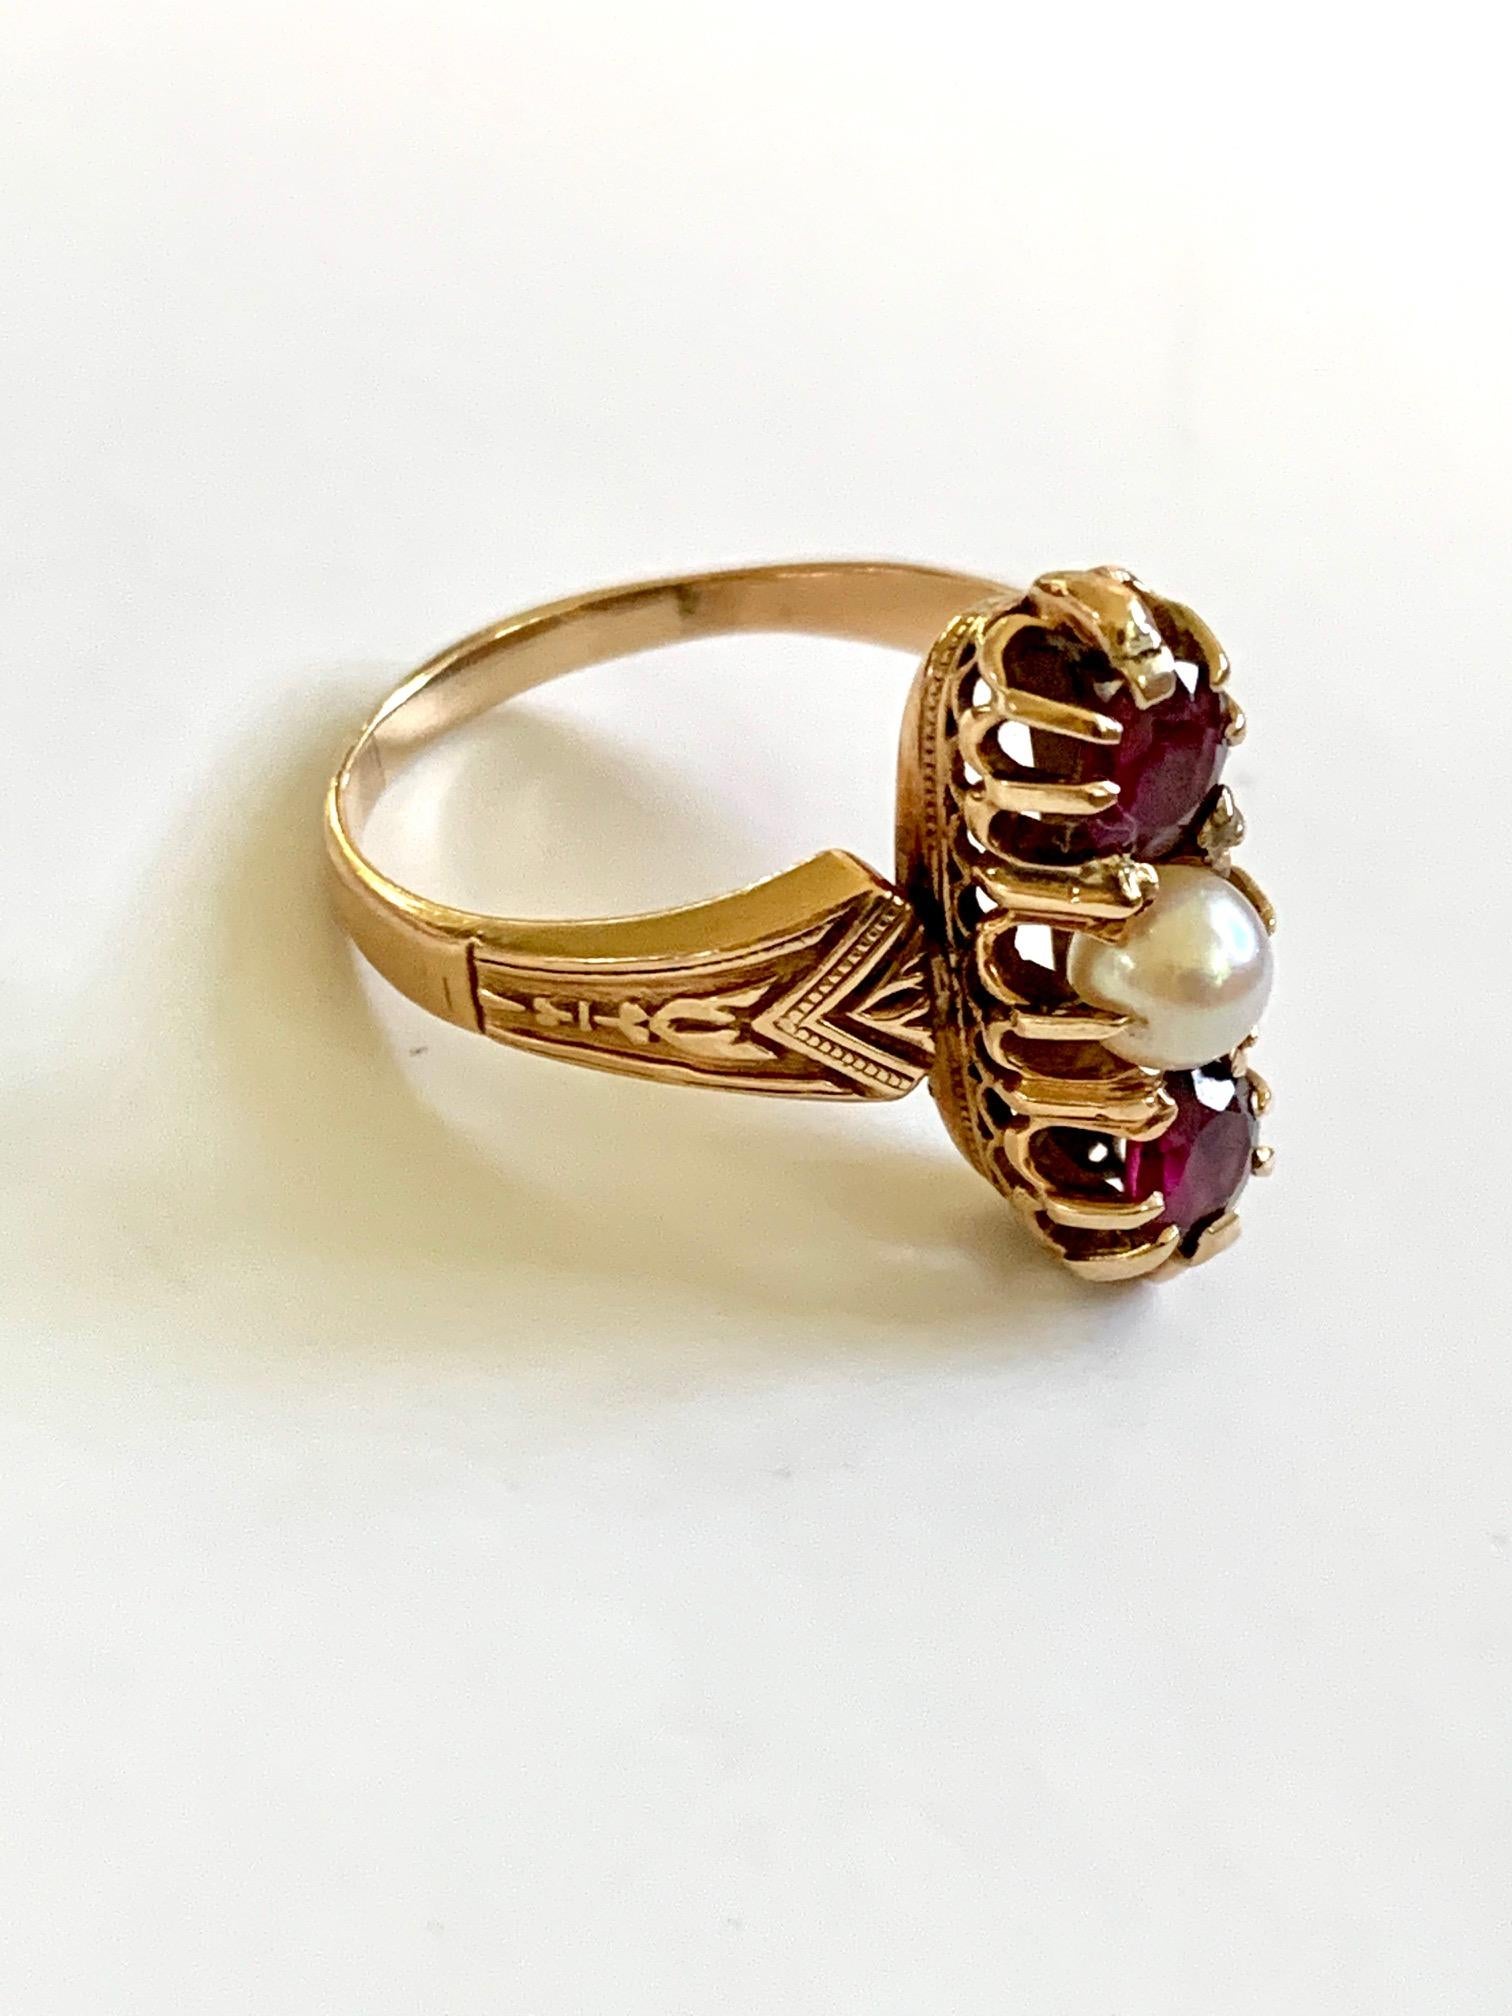 Victorian rings are so lovely; the workmanship and detail of the setting is always stunning.  This ring is tested 14 karat Gold.  There is one 6mm Pearl, in between two faceted 5.5mm Garnets. 

Size: 11 - this ring is resizable but vendor does not